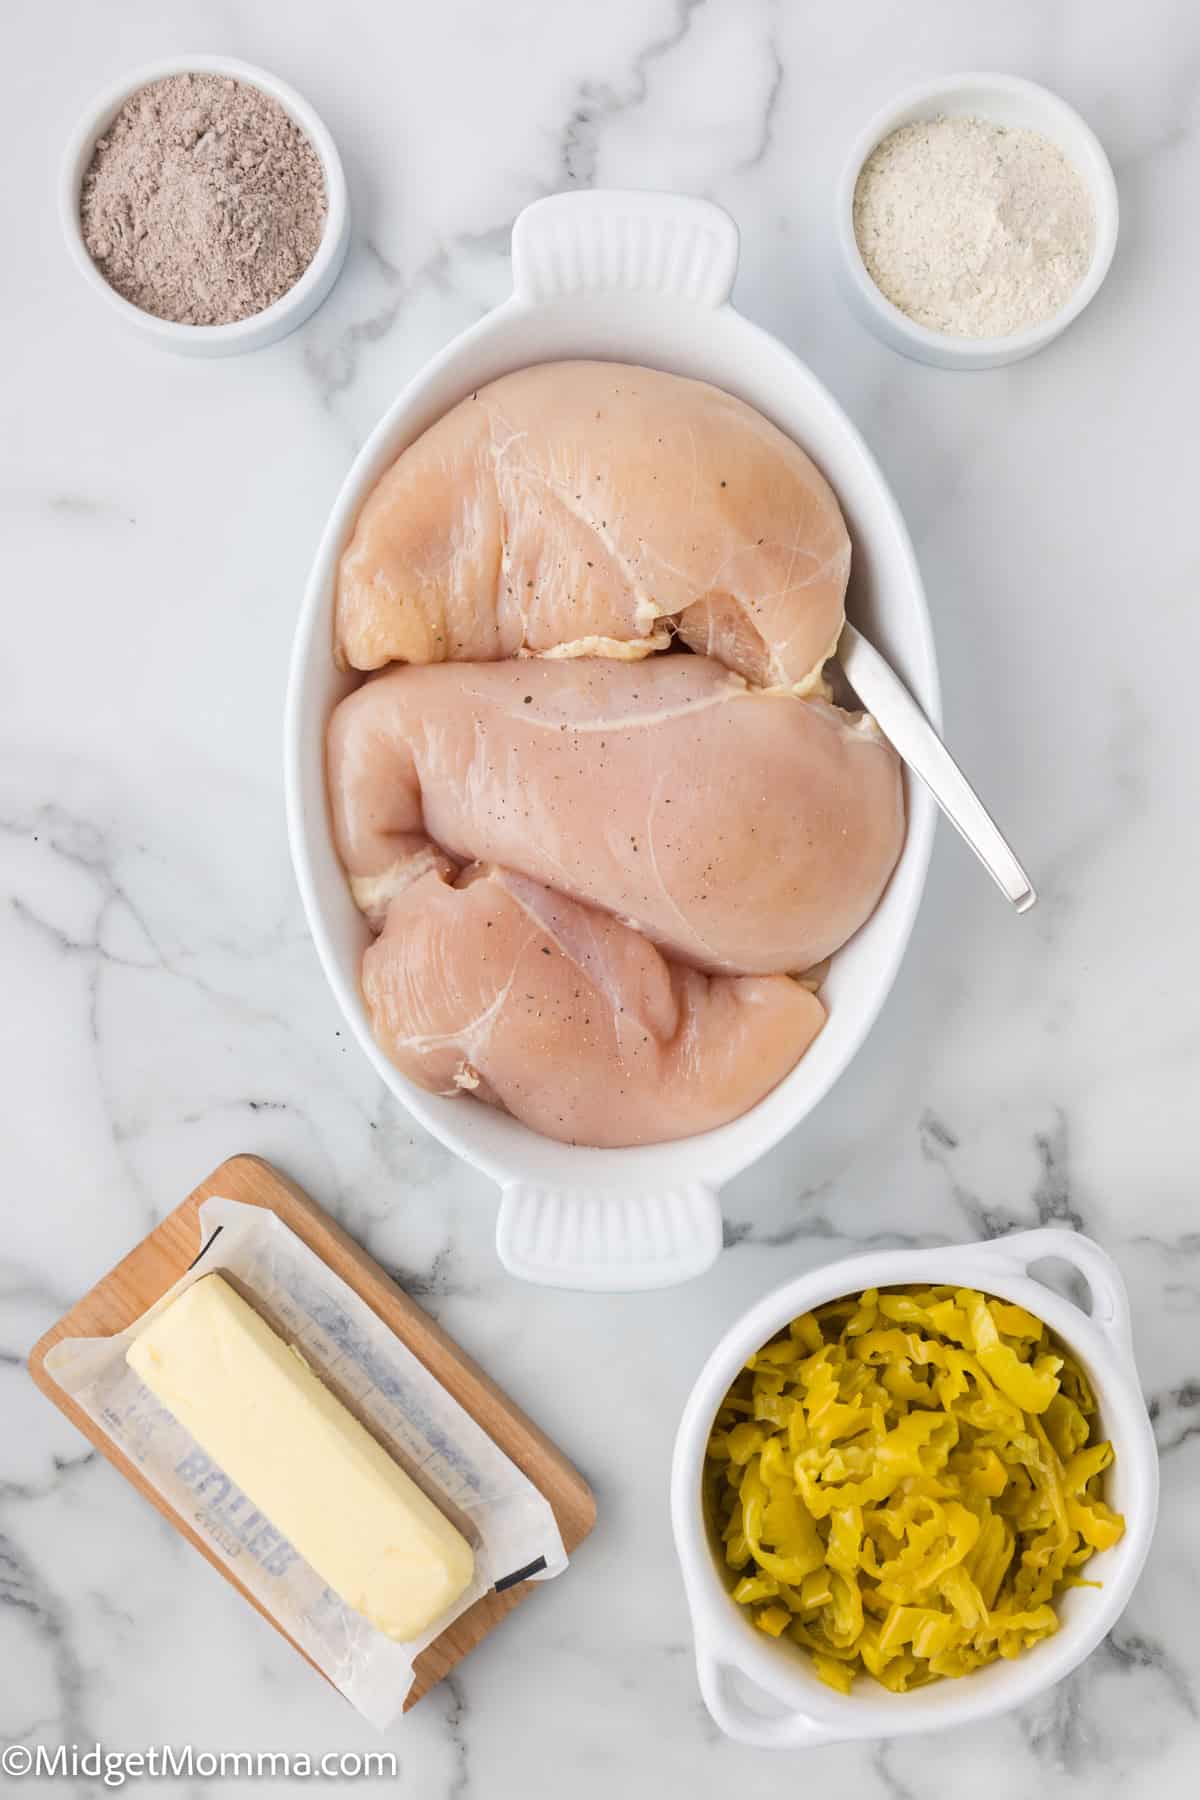 Slow Cooker Mississippi Chicken Recipe ingredients - Raw chicken breasts in a white dish, surrounded by ingredients including flour, spices, butter, and sliced pickles on a marble countertop.